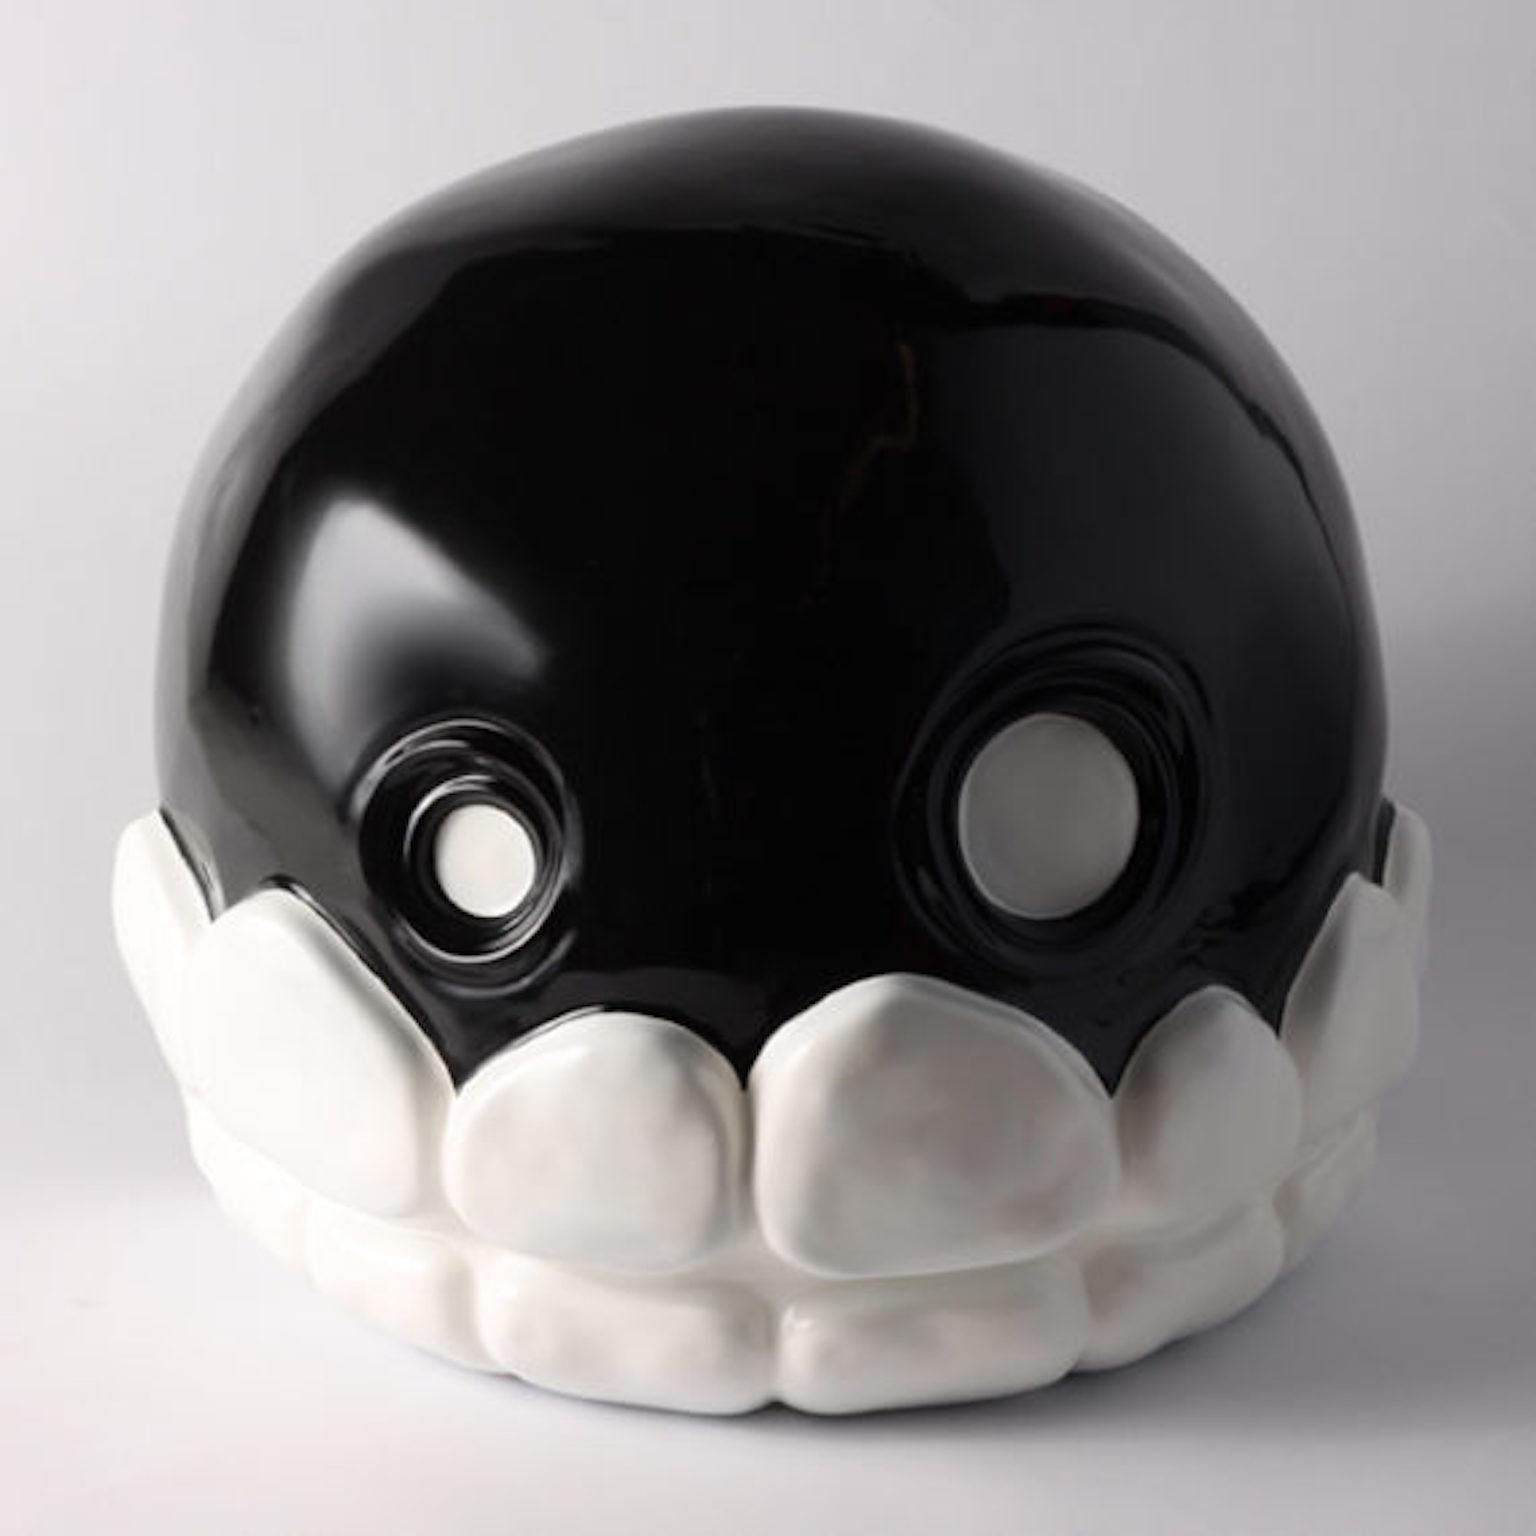 Ceramic sculpture model Skull, Skull collection, designed by Microbo and produced by Superego Editions in 2009. Limited edition of 50 pieces. Signed and numbered.

Biography:
Born and raised in Sicily, Microbo spent the 1990s in London, studying,